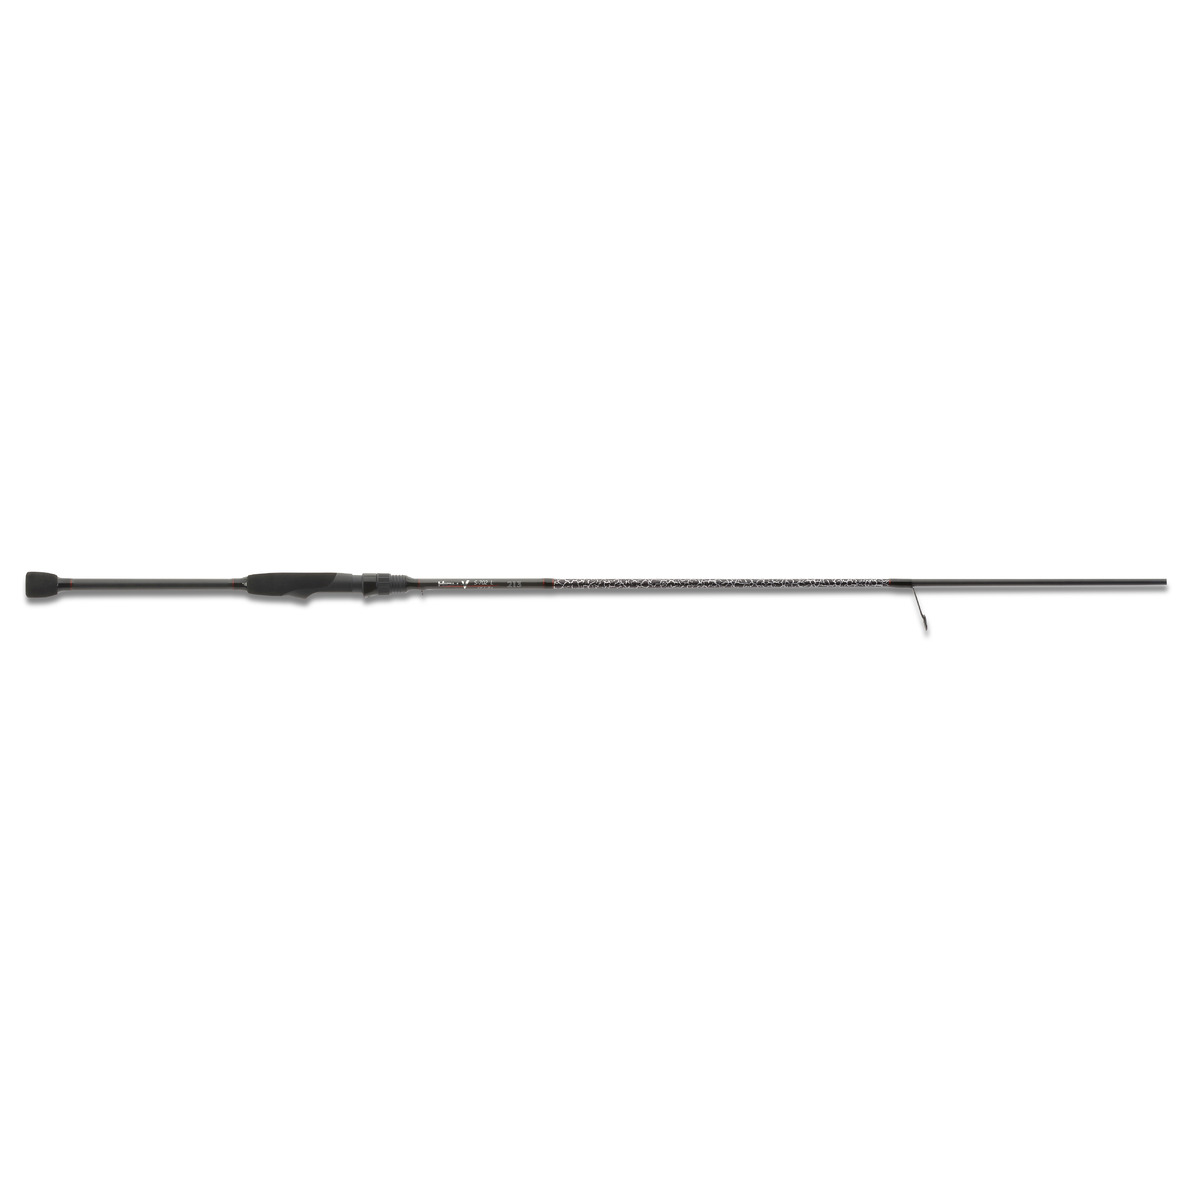 Iron Claw High-v Pike - S-702L 213 5-21 g